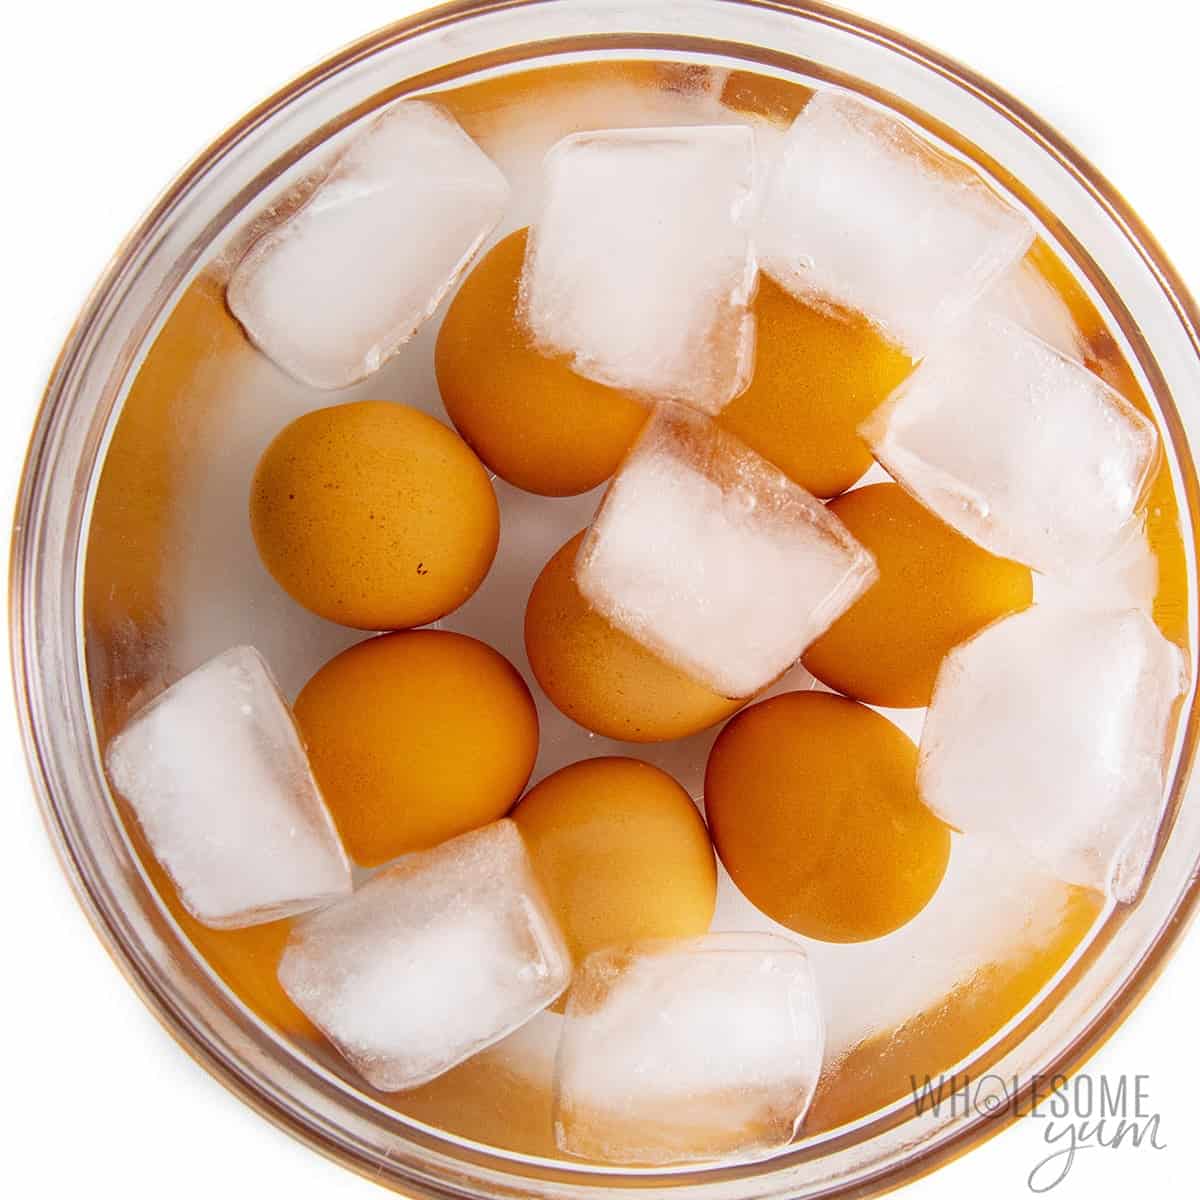 Boiled eggs plunged in ice water.